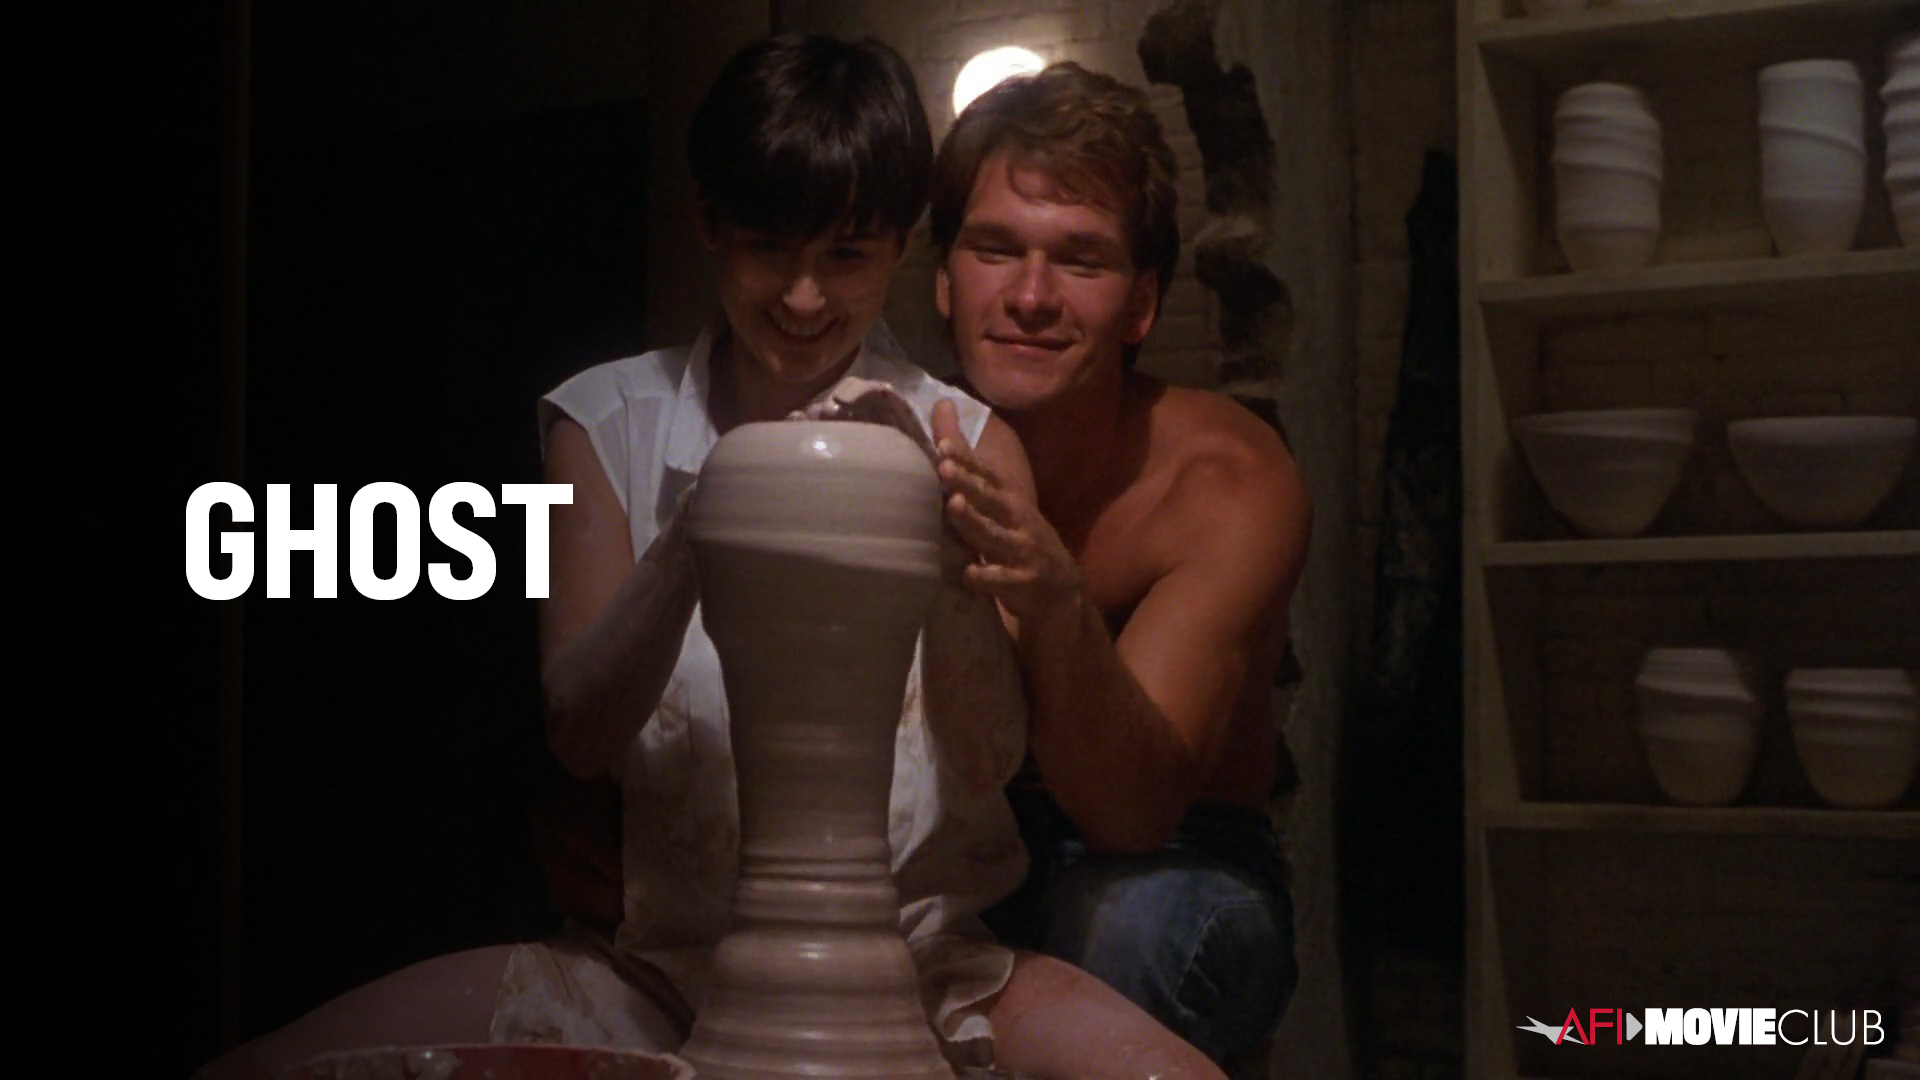 Ghost Film Still - Demi Moore and Patrick Swayze